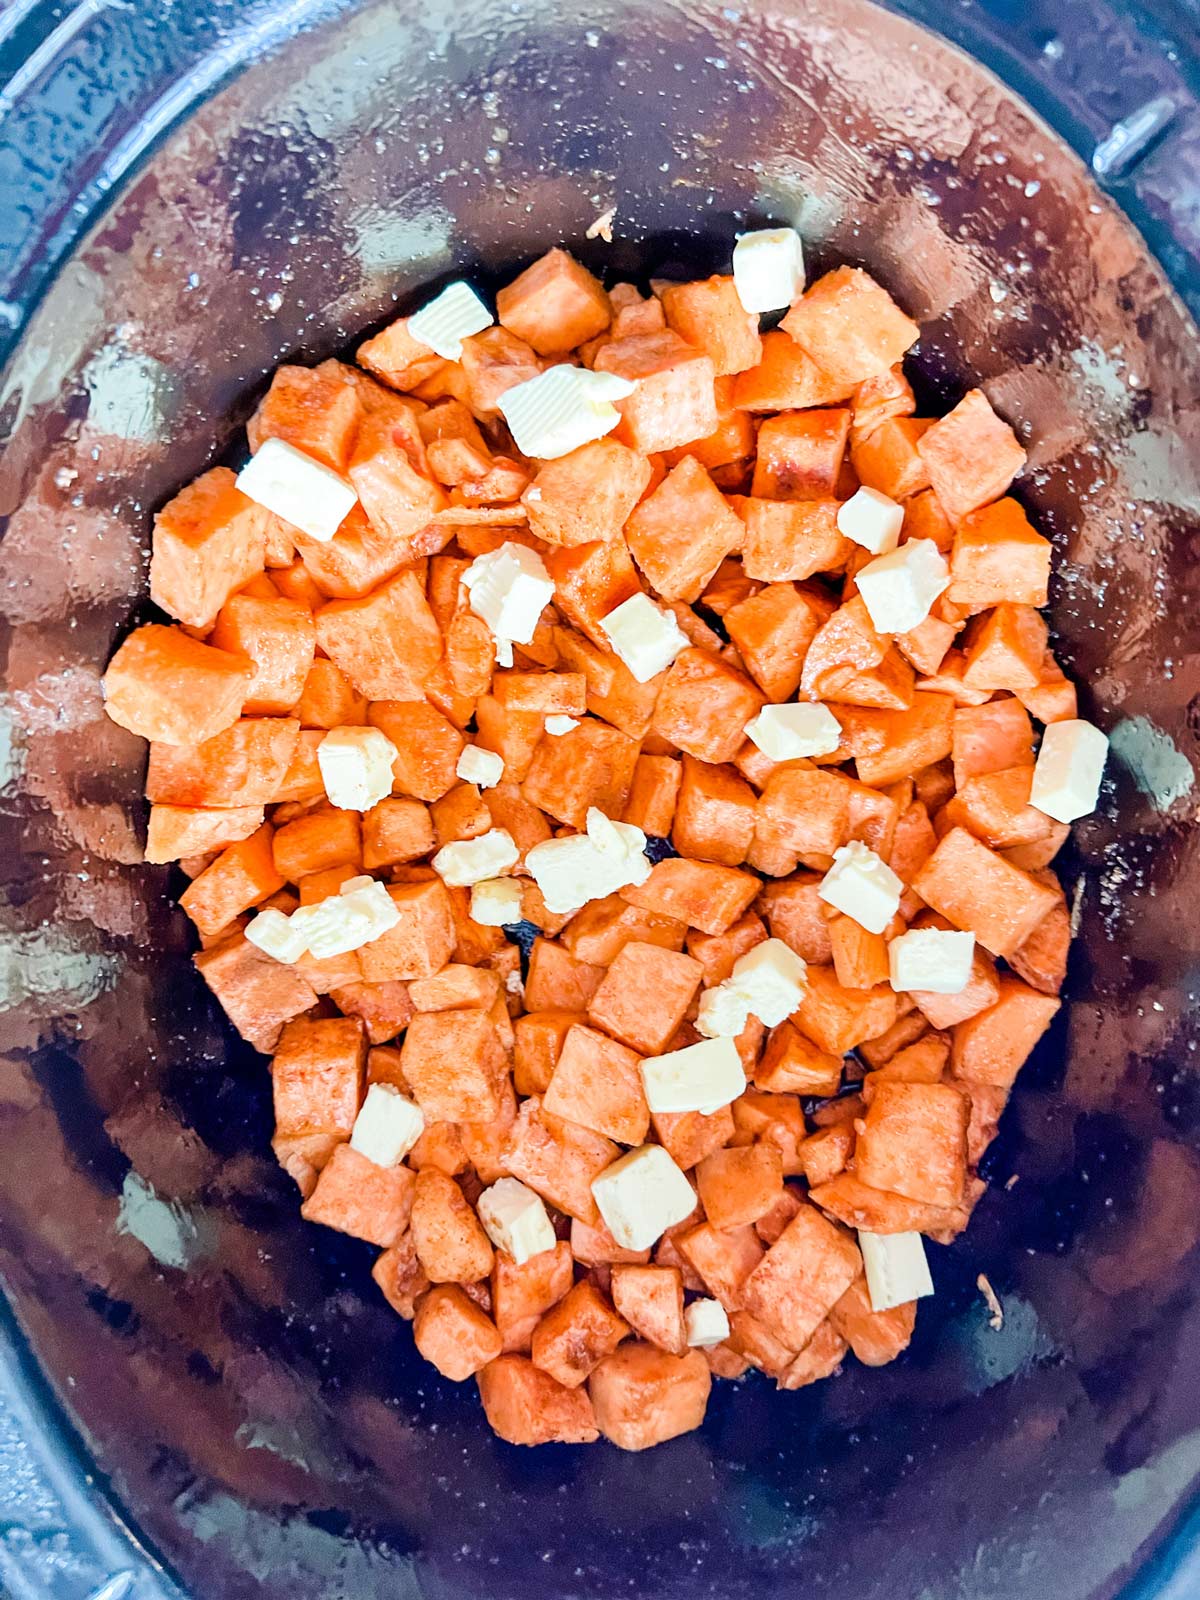 Sweet potatoes tossed with maple syrup, sugar, and seasonings and dotted with butter in a slow cooker ready for cooking.